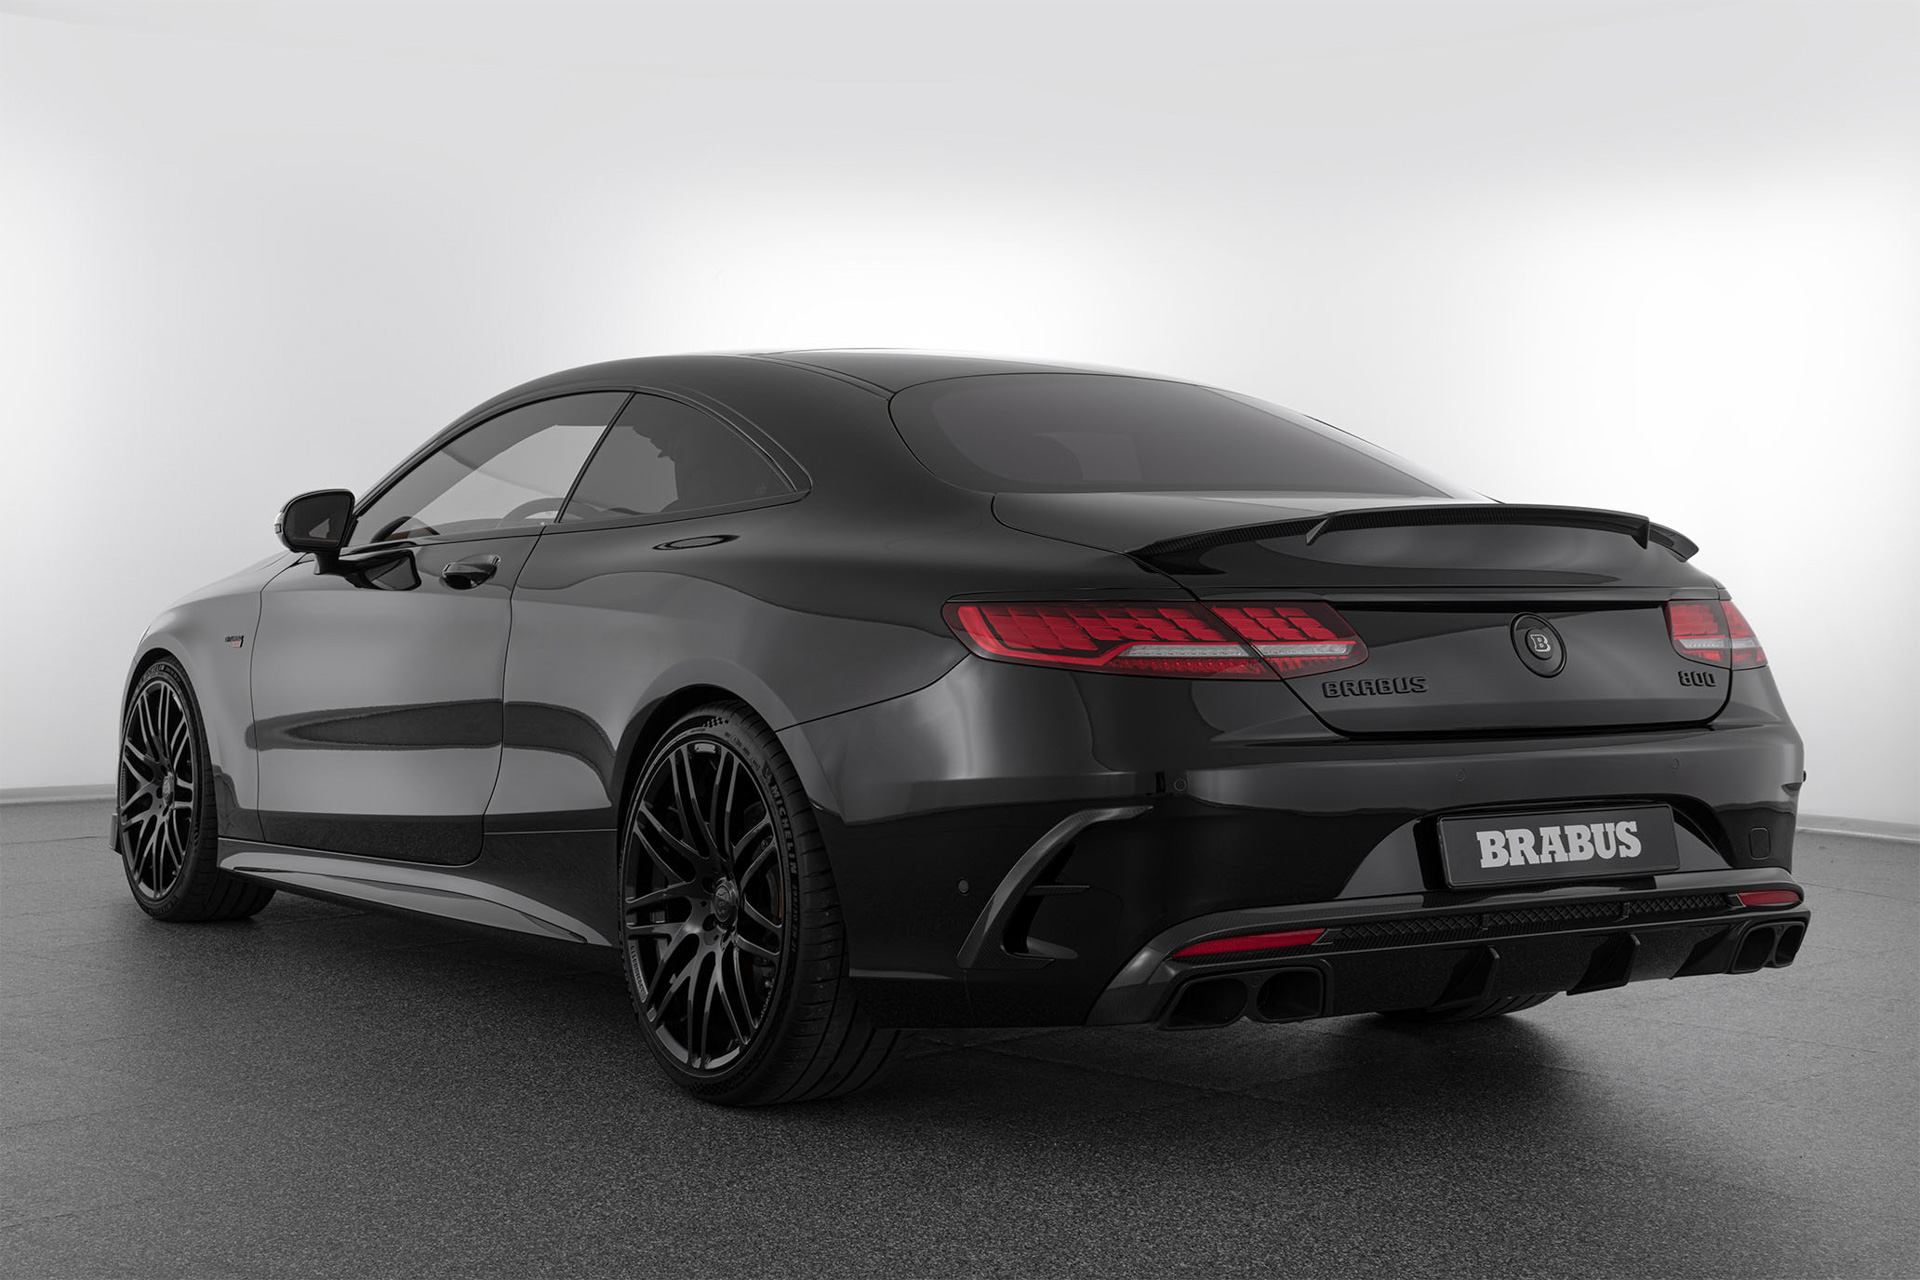 Check price and buy New BRABUS 800 Mercedes-Benz AMG S 63 Coupe For Sale